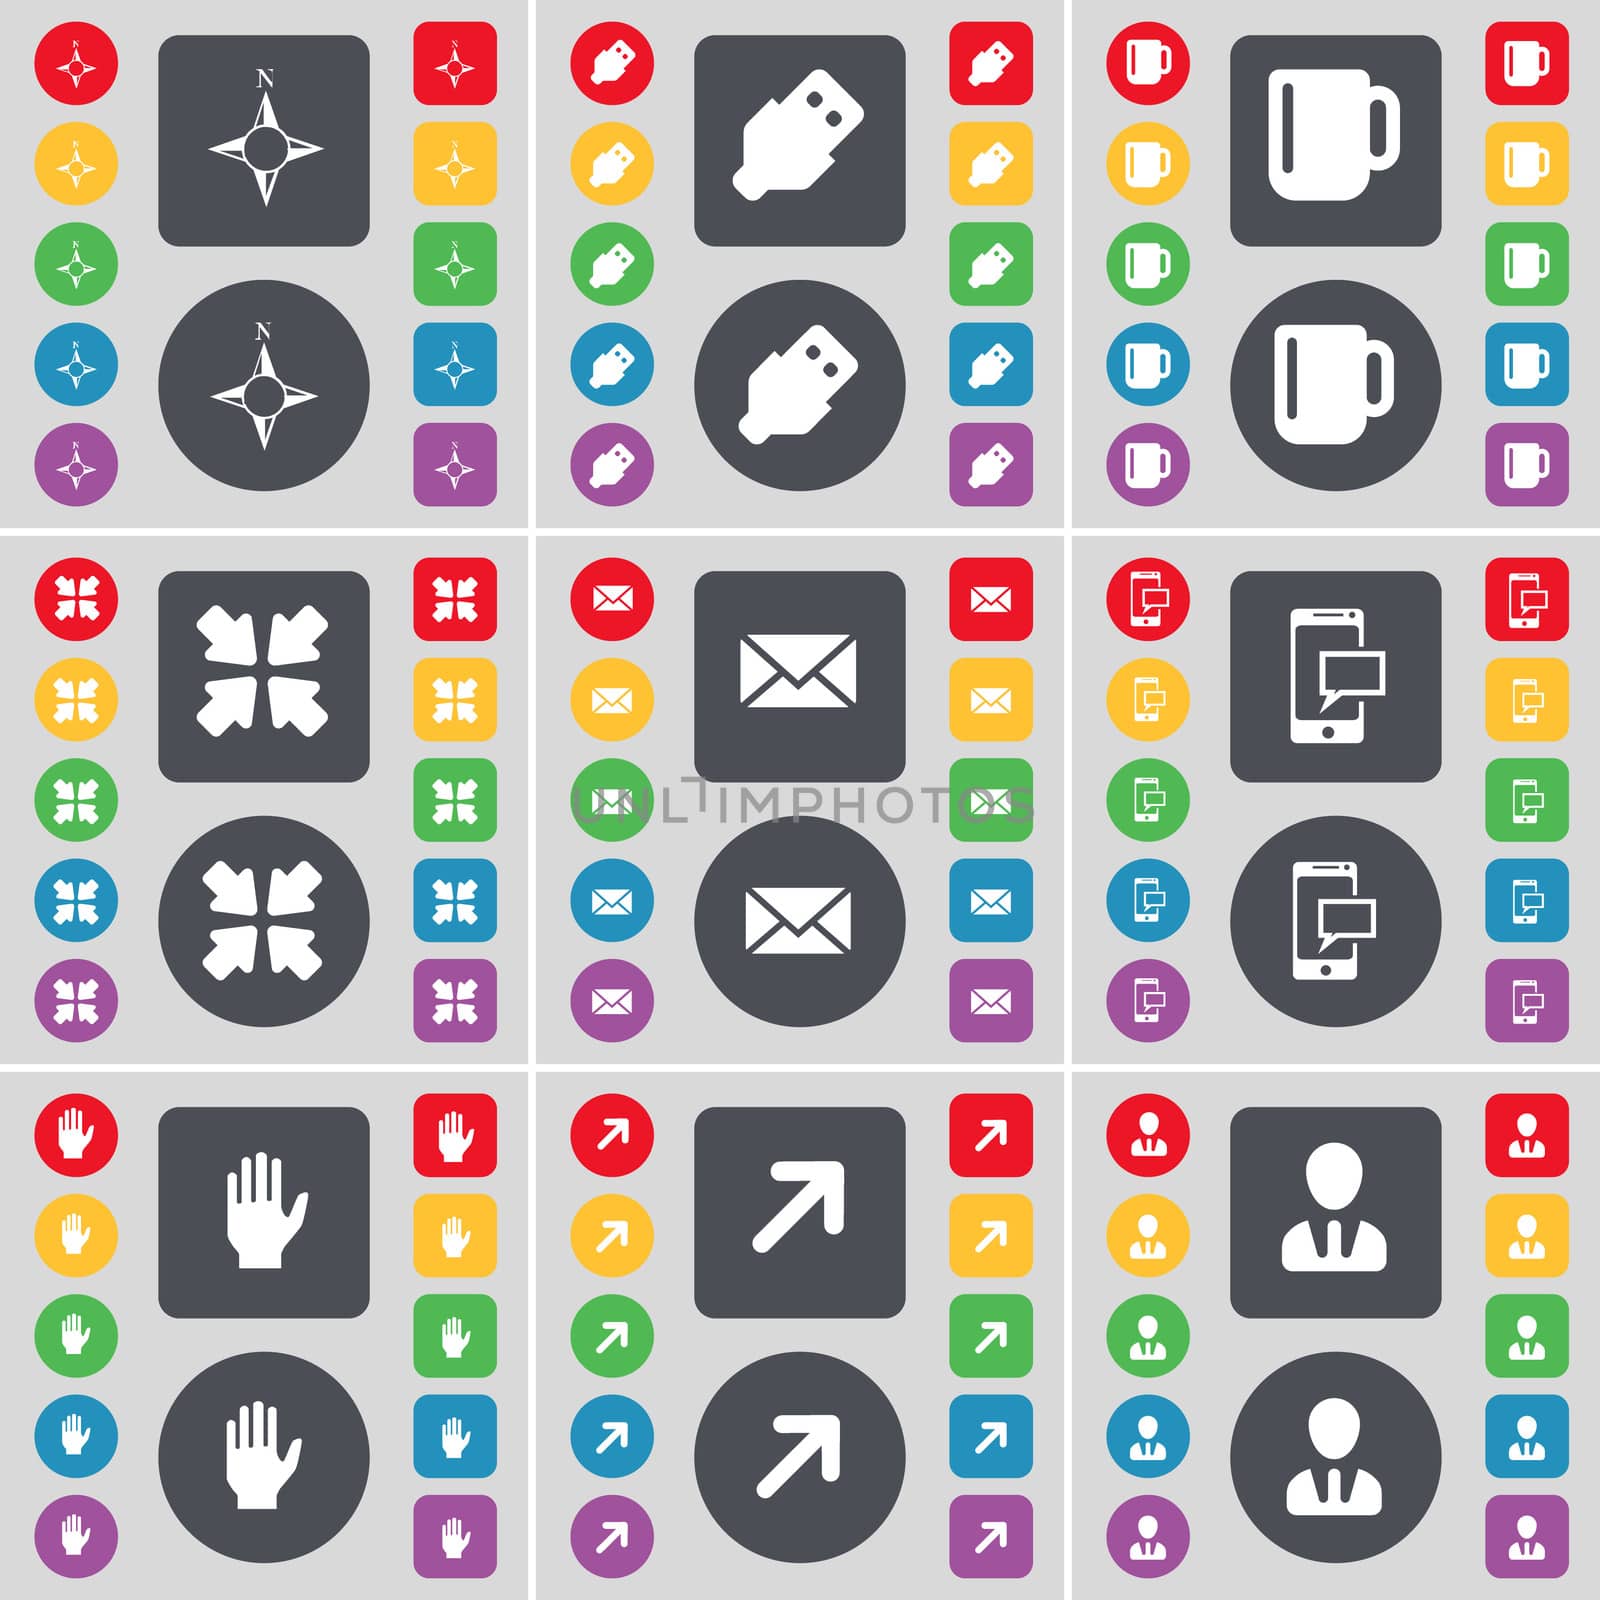 Compass, USB, Cup, Deploying screen, Message, SMS, Hand, Full screen, Avatar icon symbol. A large set of flat, colored buttons for your design. illustration